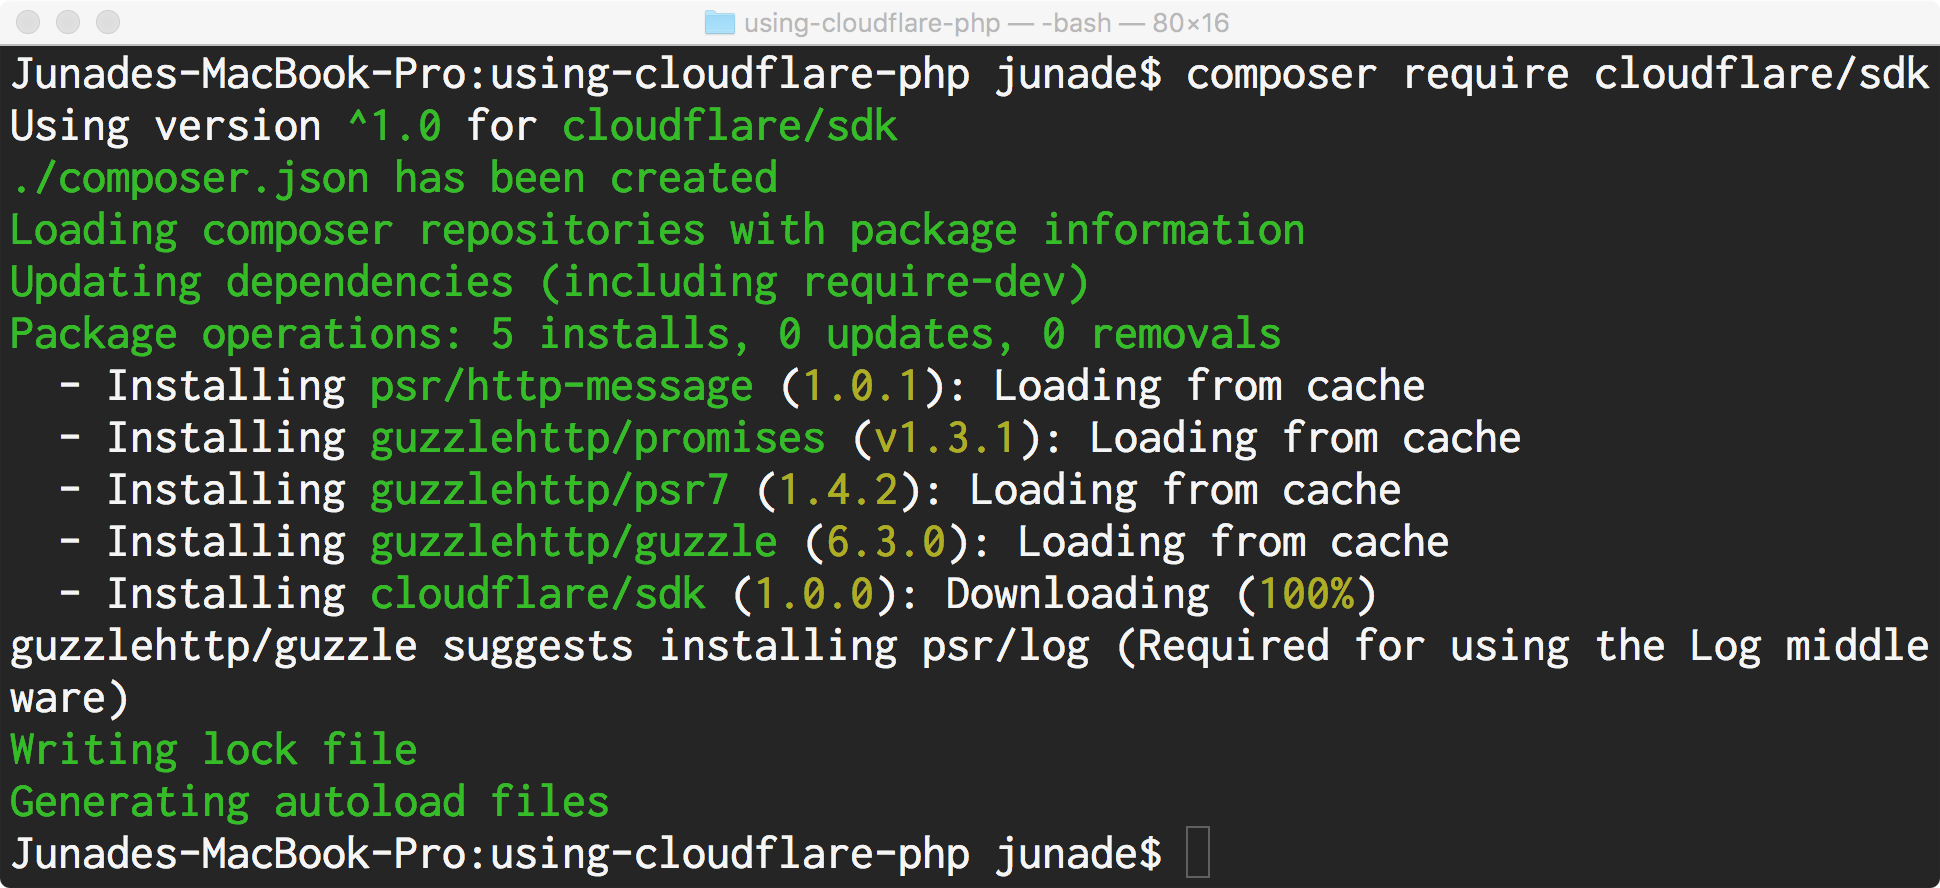 A New API Binding: cloudflare-php